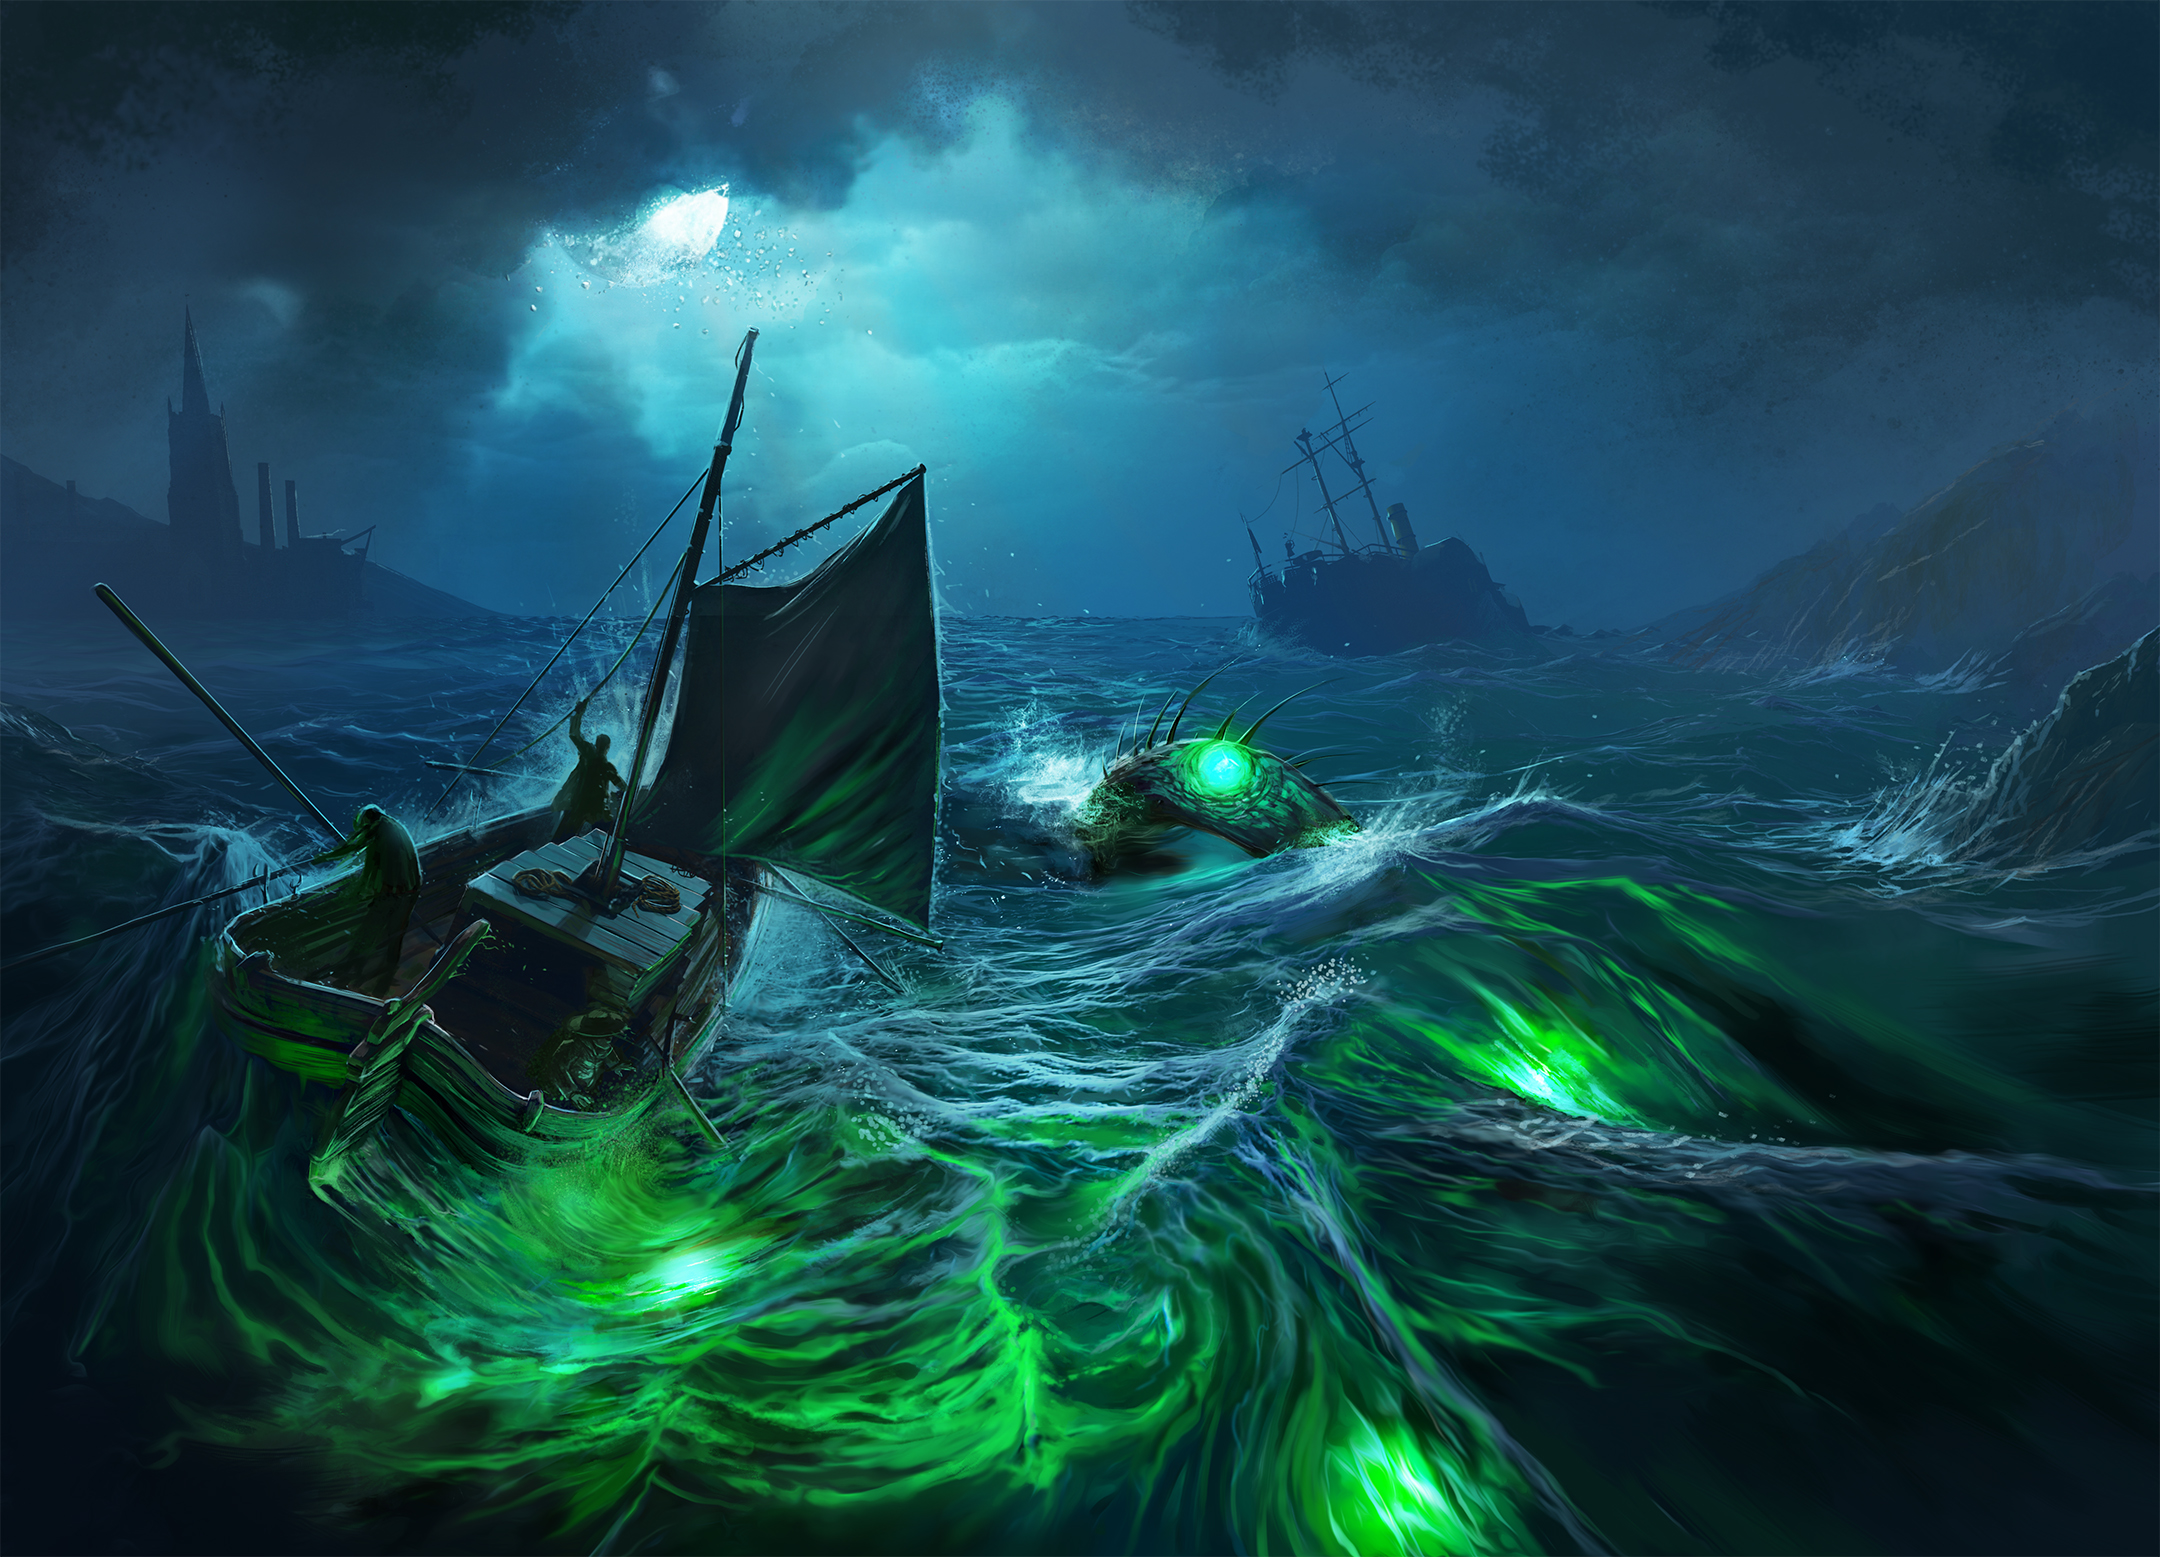 Our Brilliant Ruin; a a boat on glowing waves at night